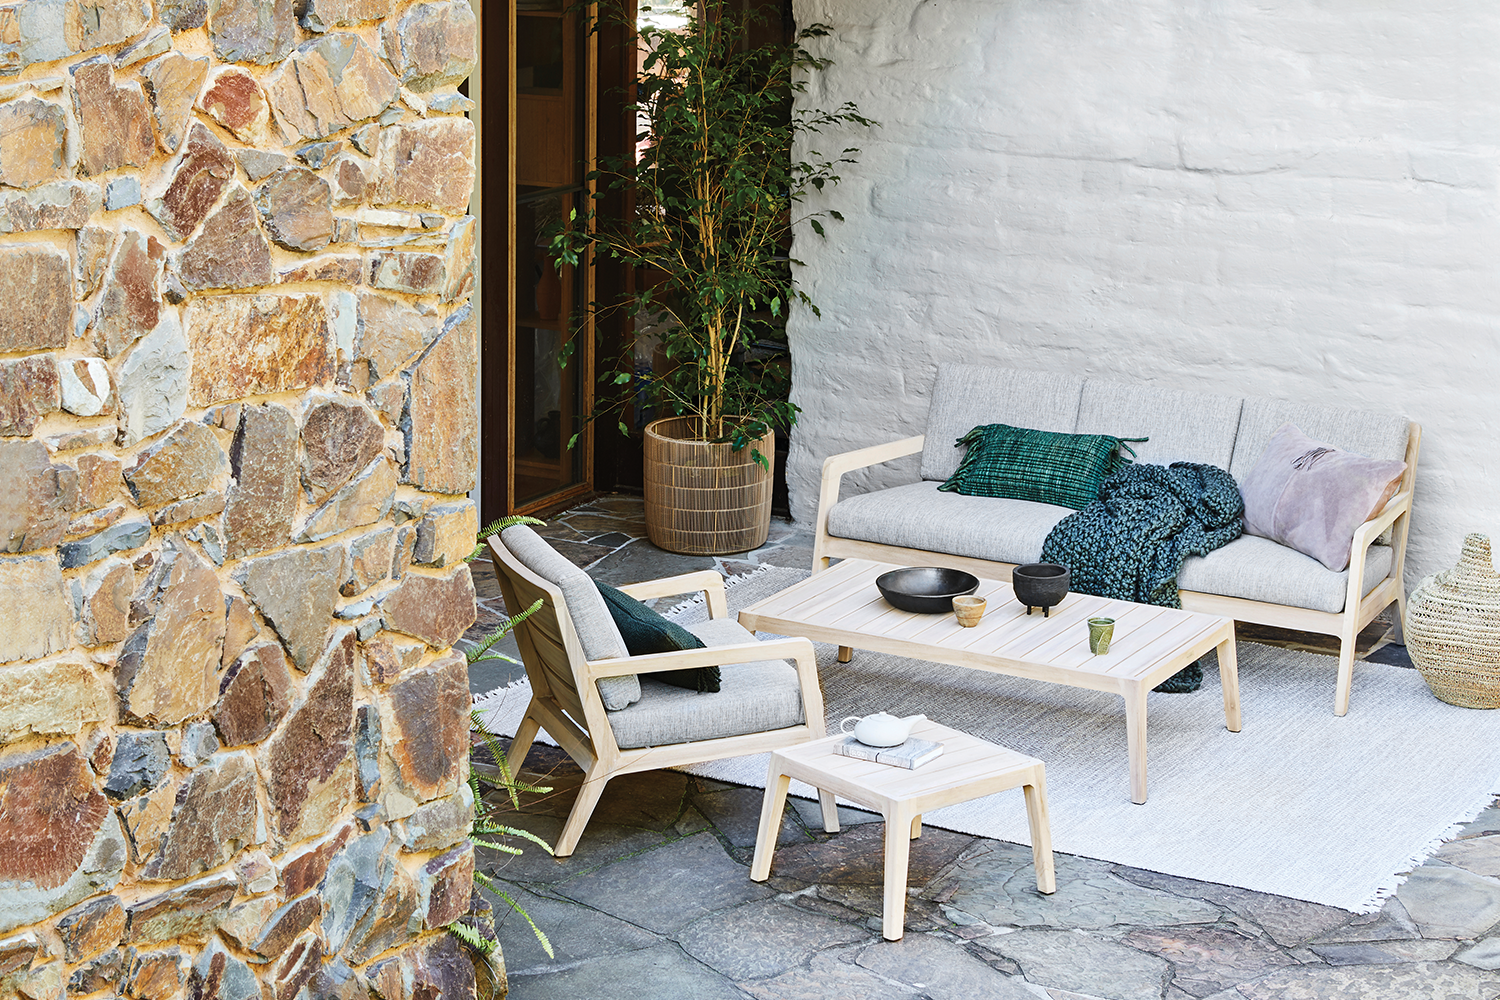 5 Tips for Cosy Outdoor Living